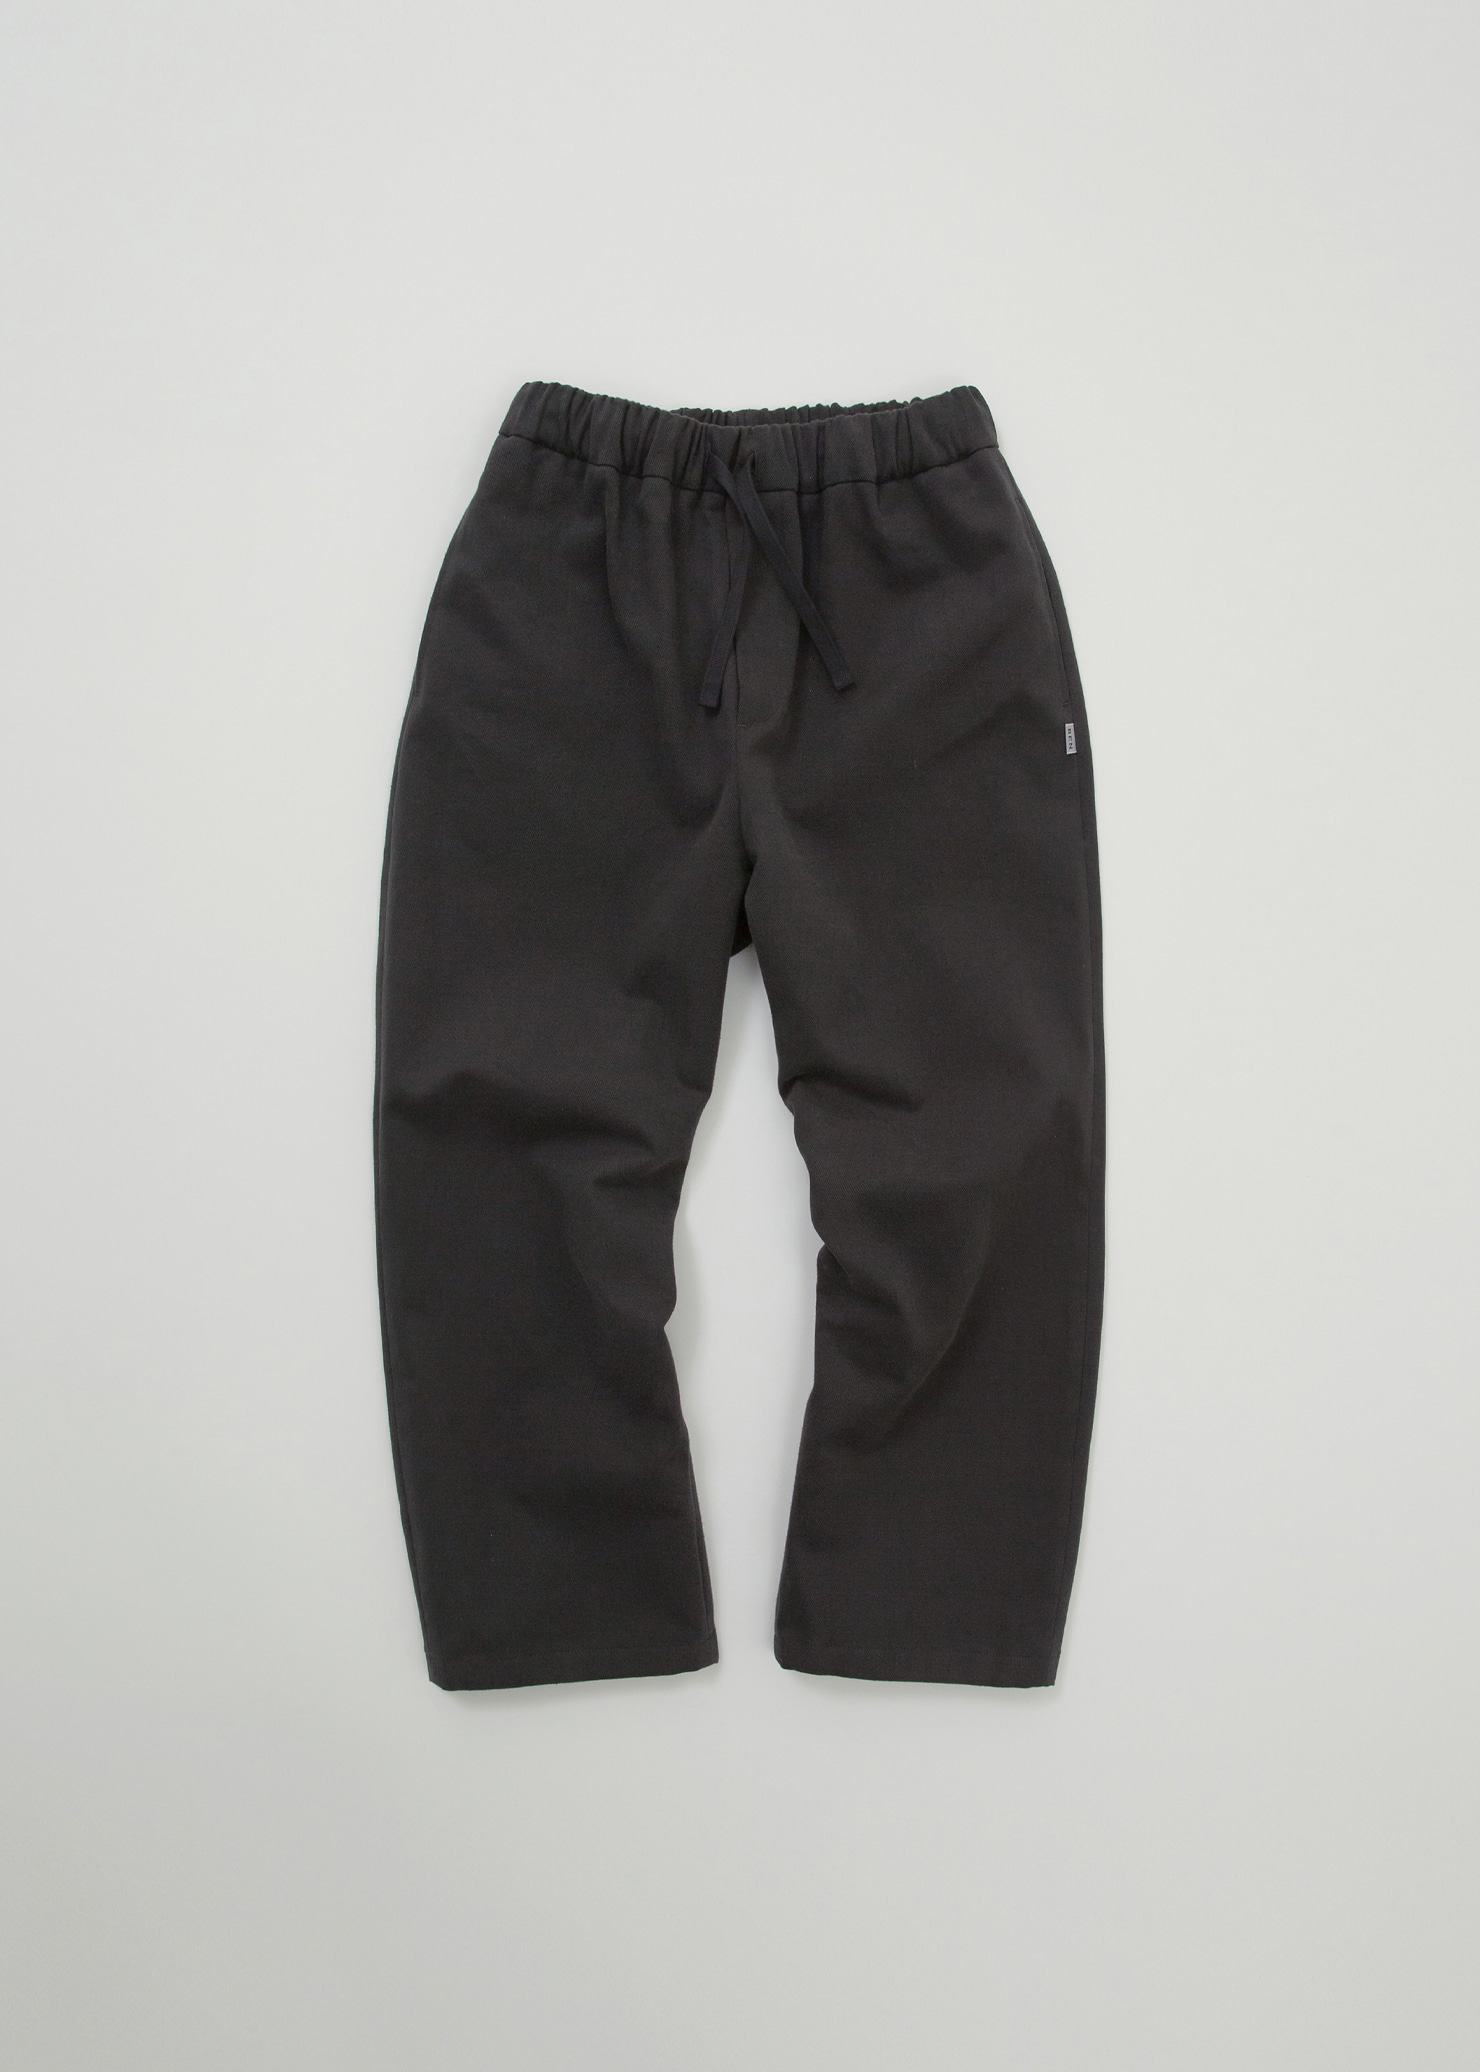 Warm Cotton Trousers _ Charcoal